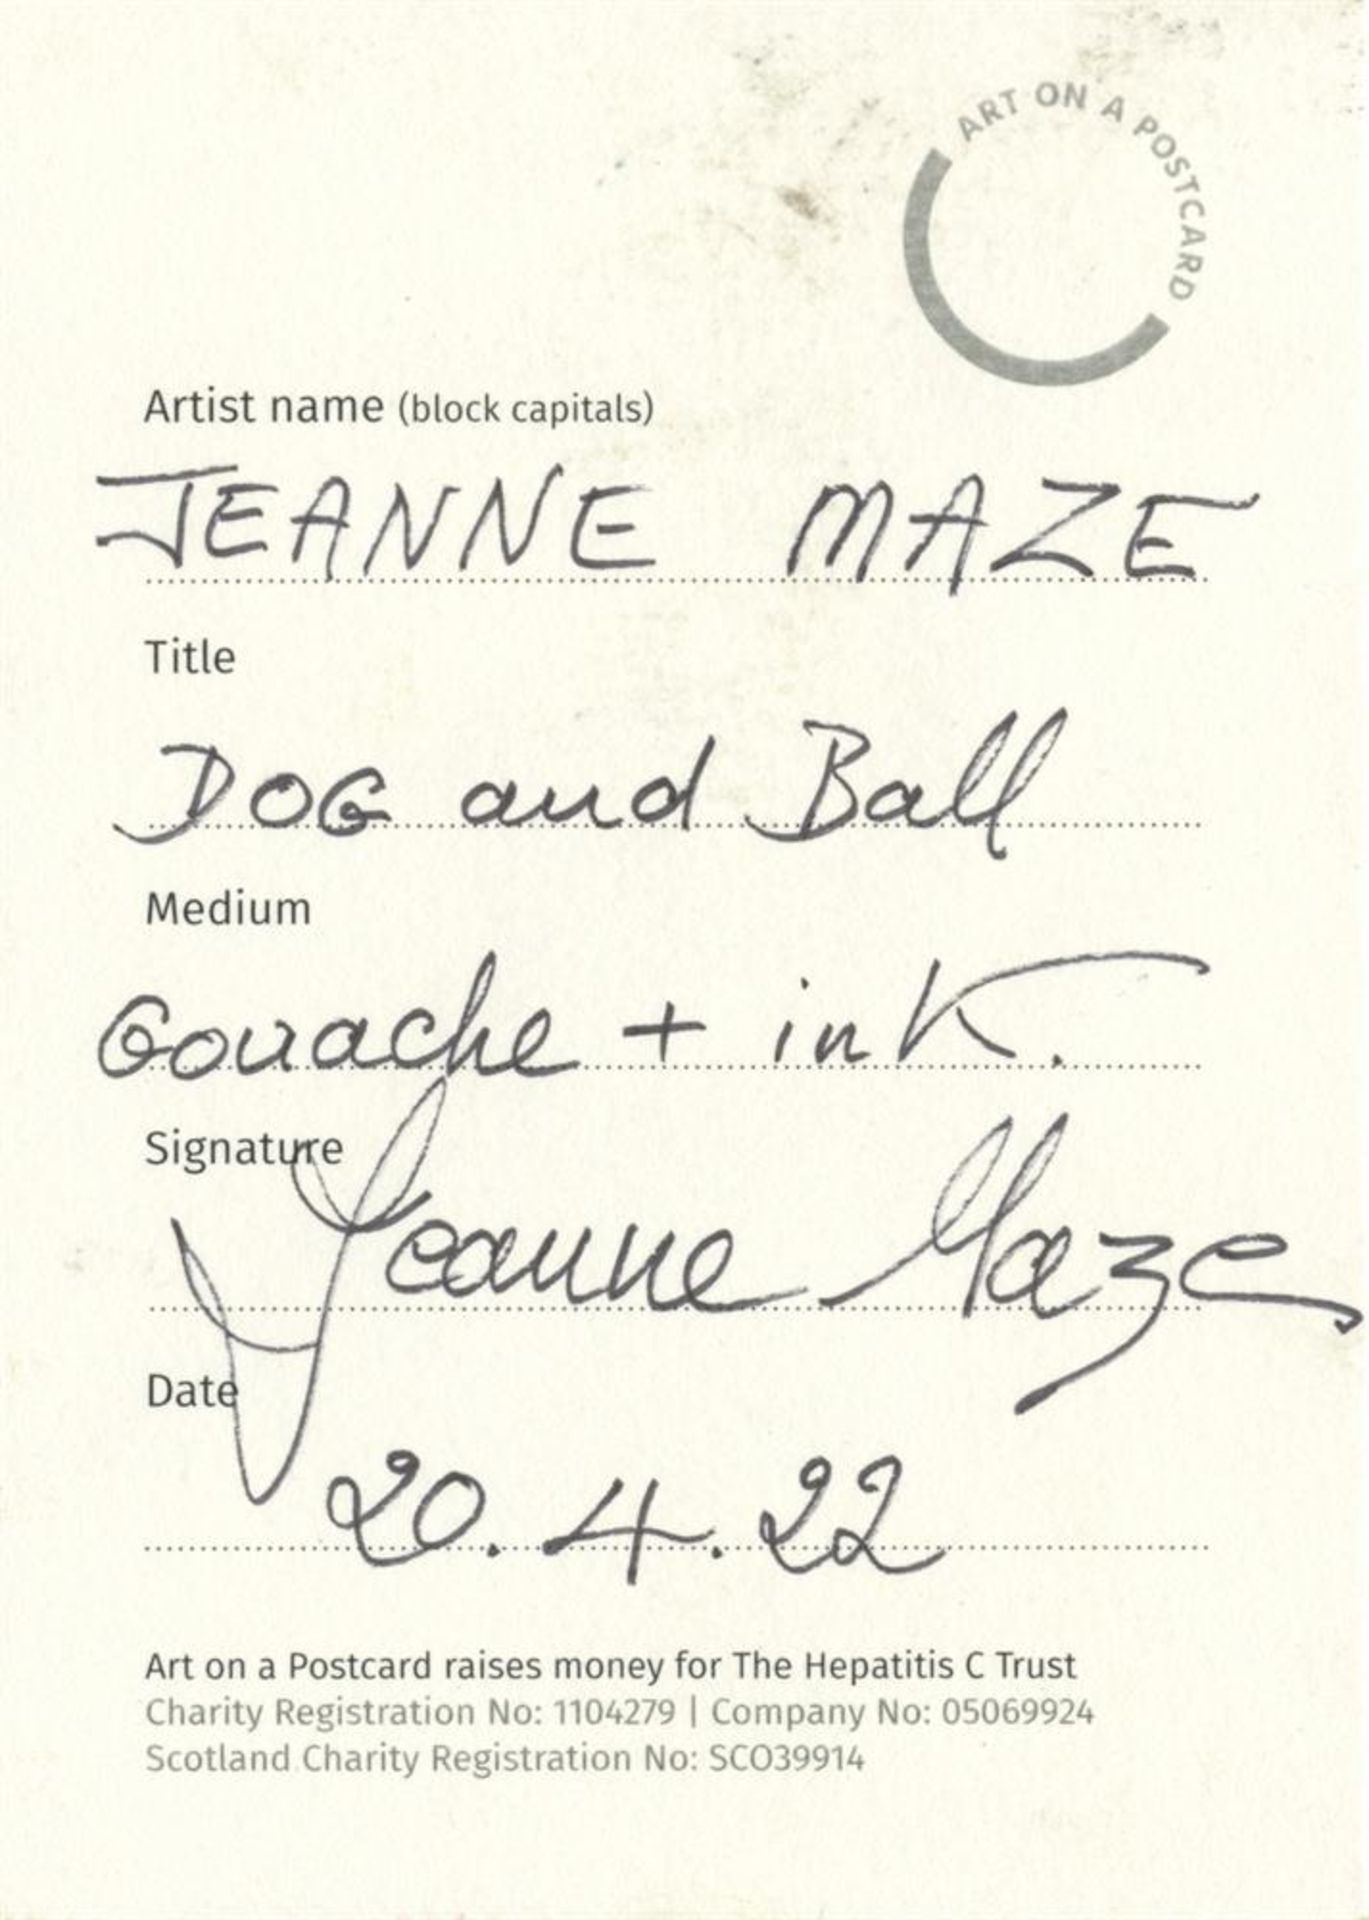 Jeanne Maze, Dog and Ball, 2022 - Image 2 of 3